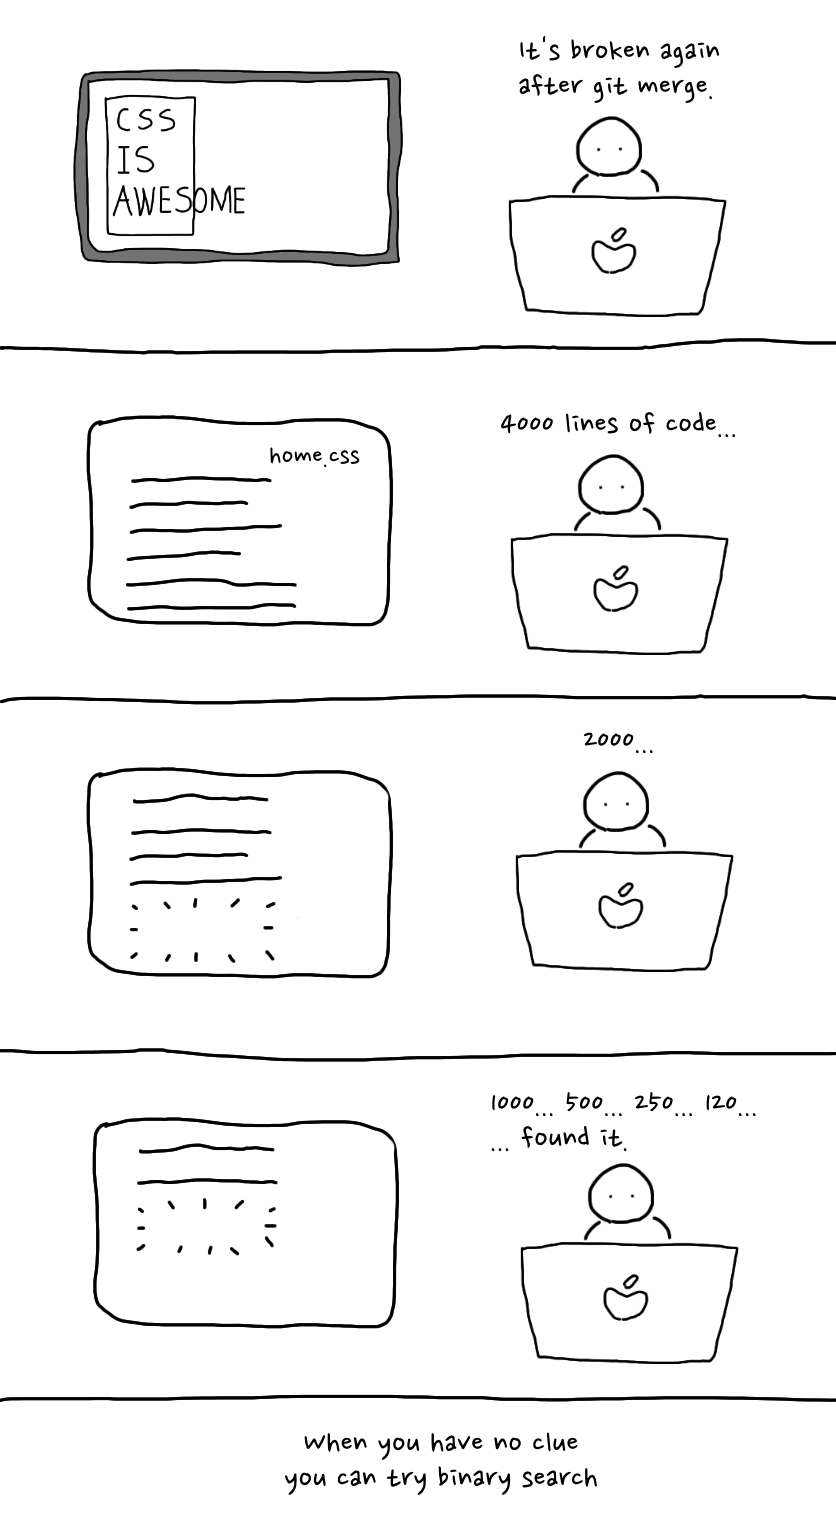 binary search in practice comic